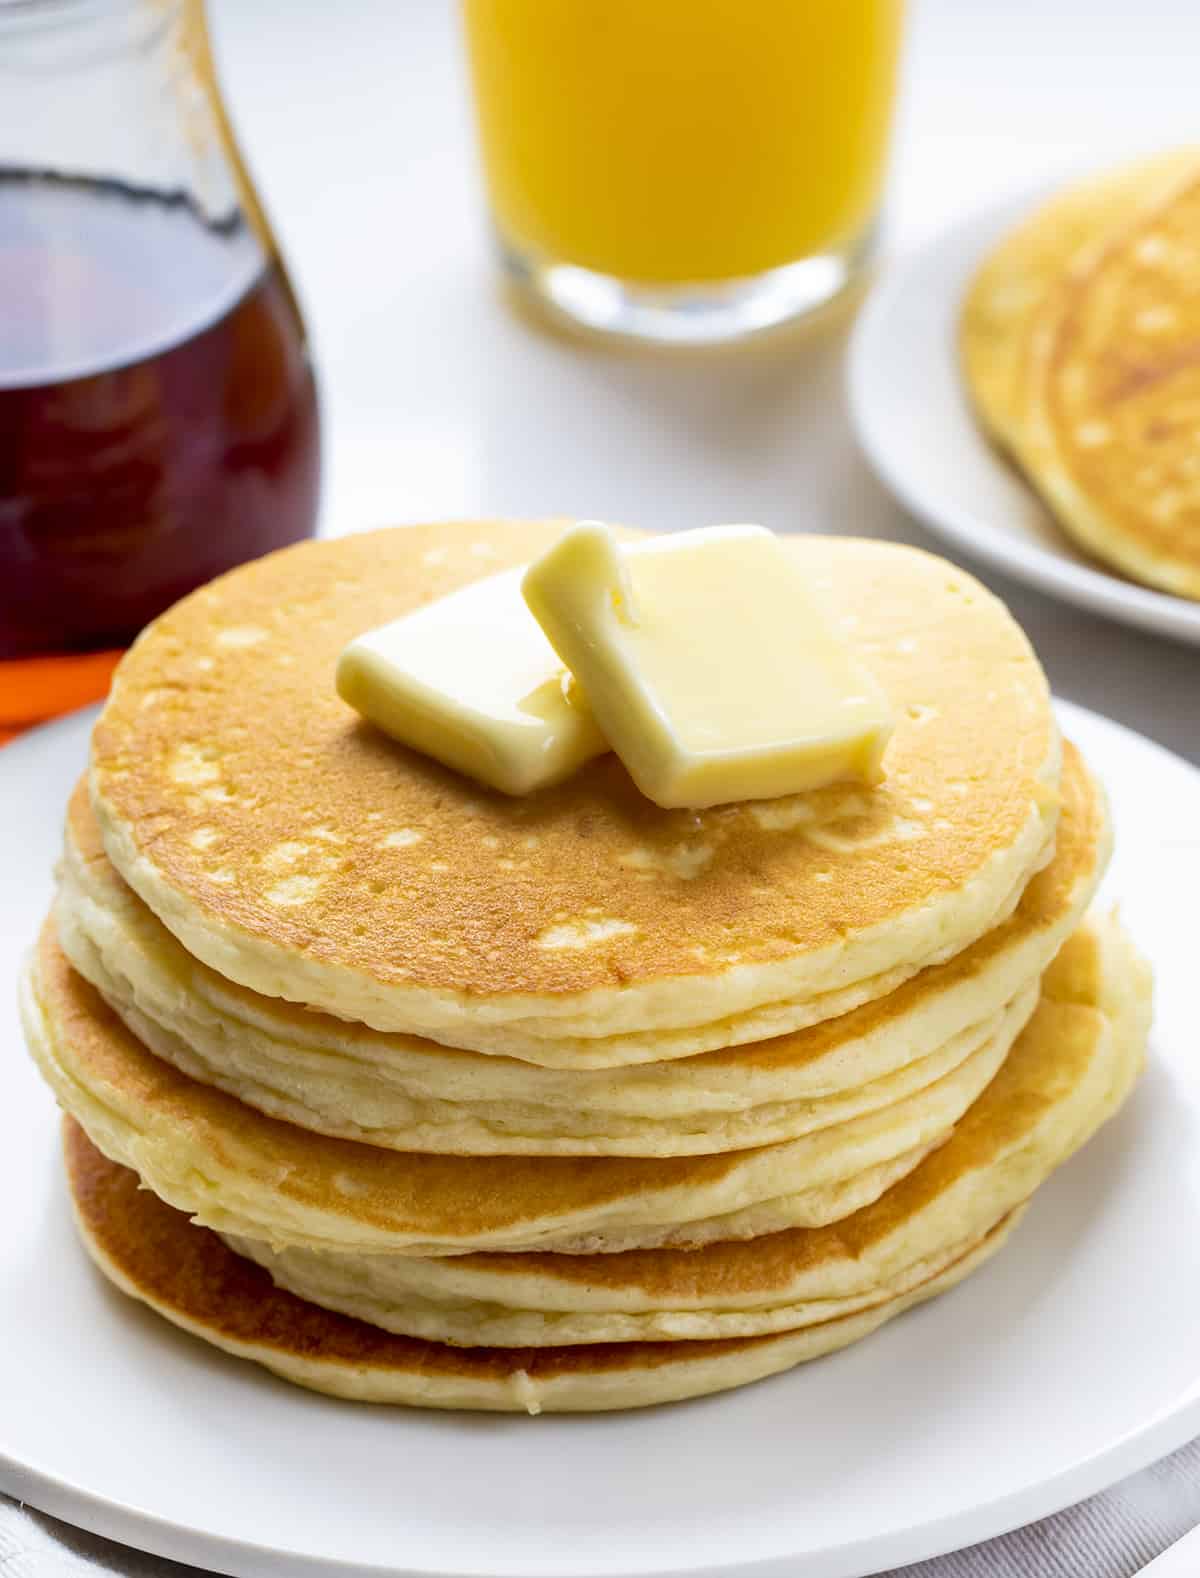 Stack of Buttermilk Pancakes with Syrup and More Pancakes in Back. Breakfast, Pancakes, Buttermilk Pancakes, Easy Pancakes, The Best Pancakes, Classic Pancakes, Breakfast Recipes, Kid Breakfast Recipes, i am baker, iambaker.